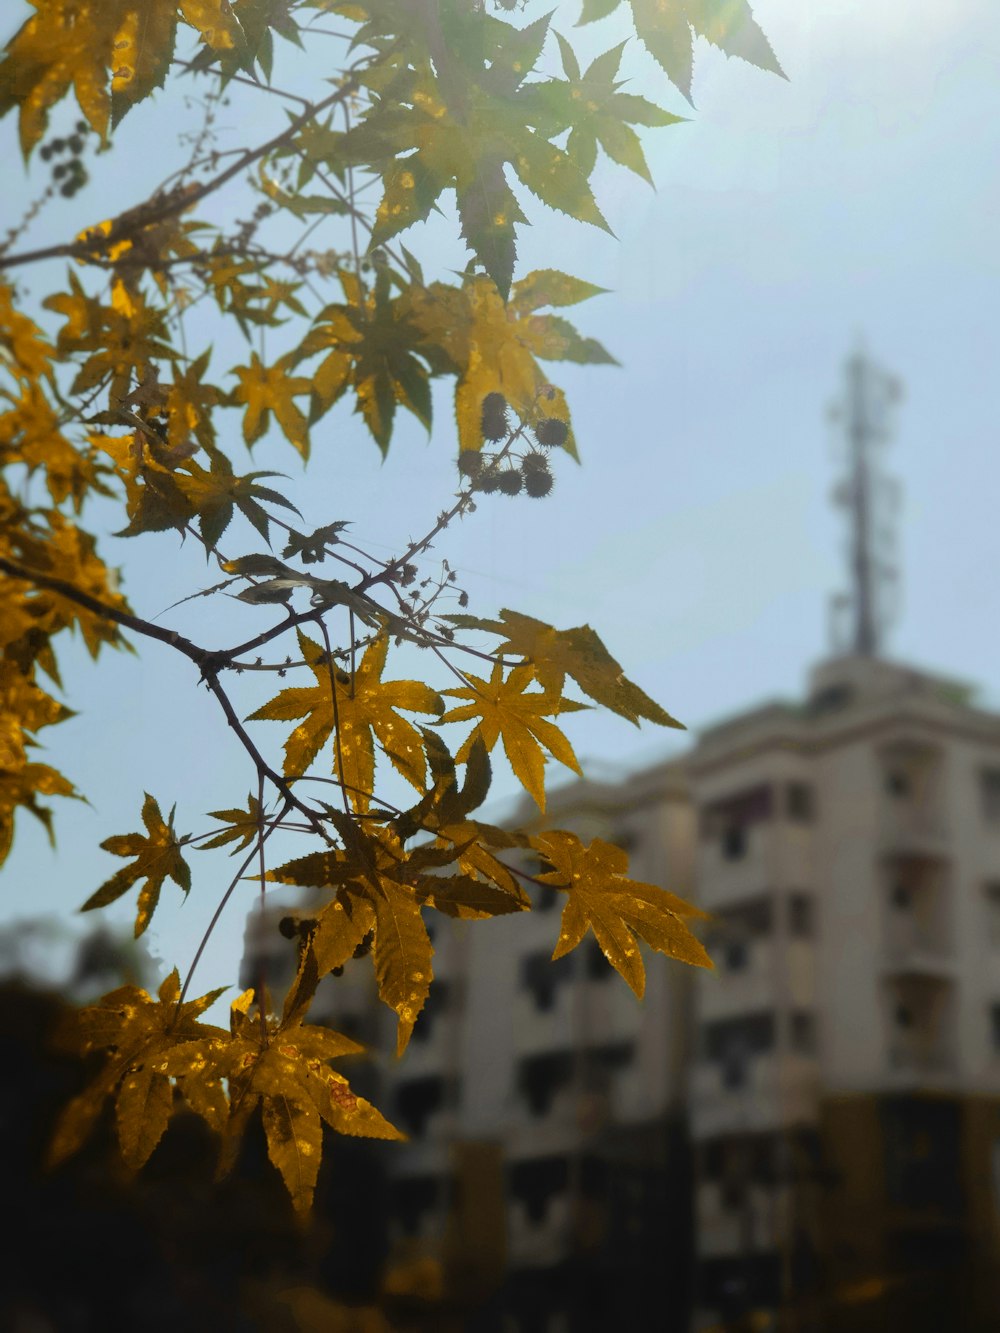 a tree branch with yellow leaves in front of a building